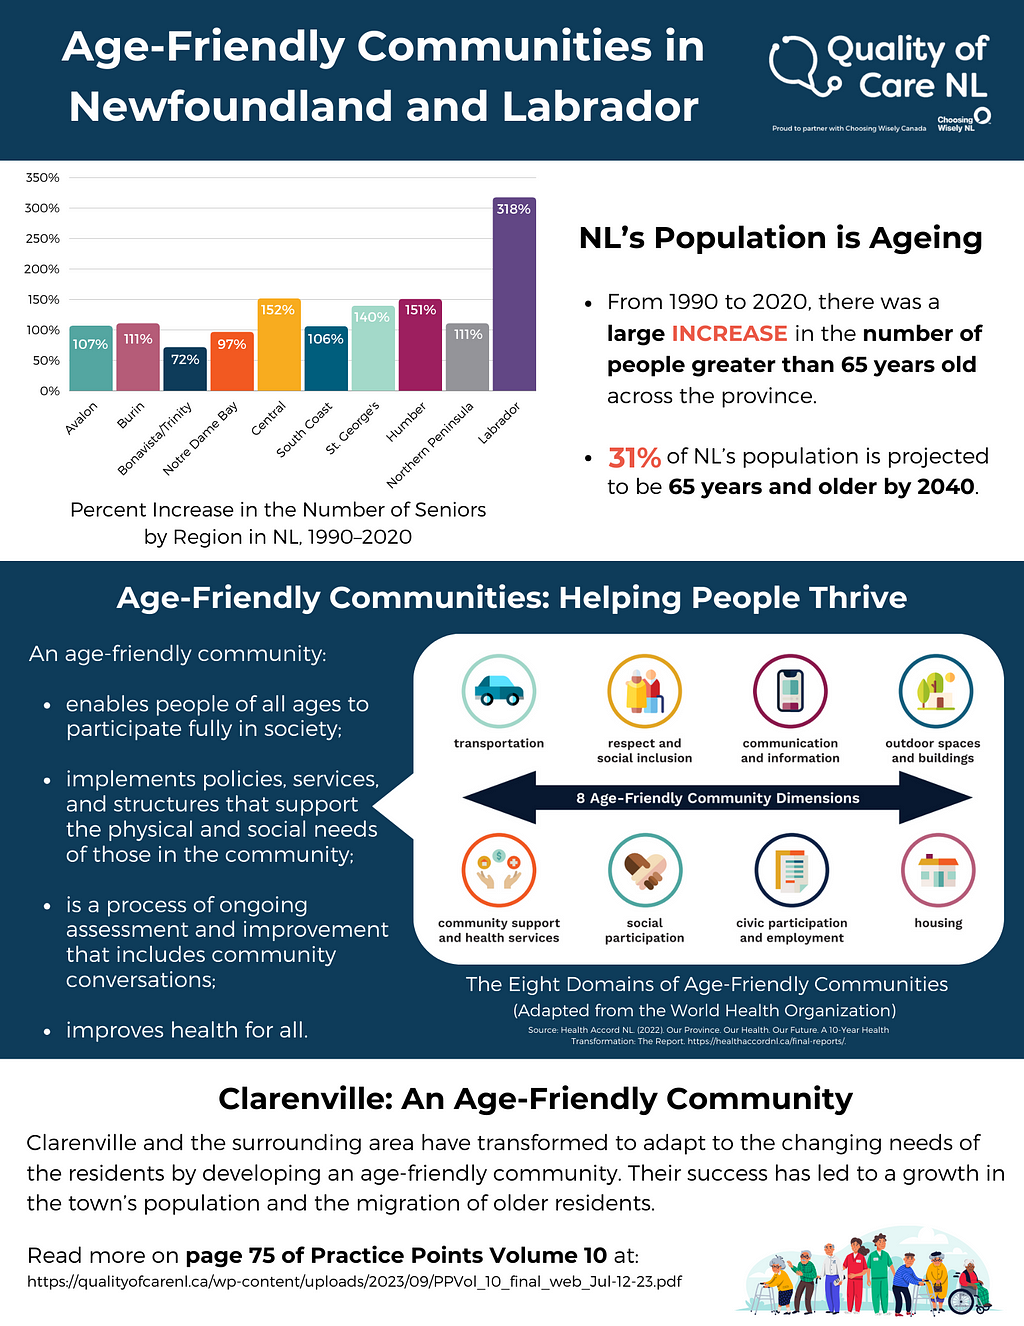 An infographic titled Age-Friendly Communities in Newfoundland and Labrador